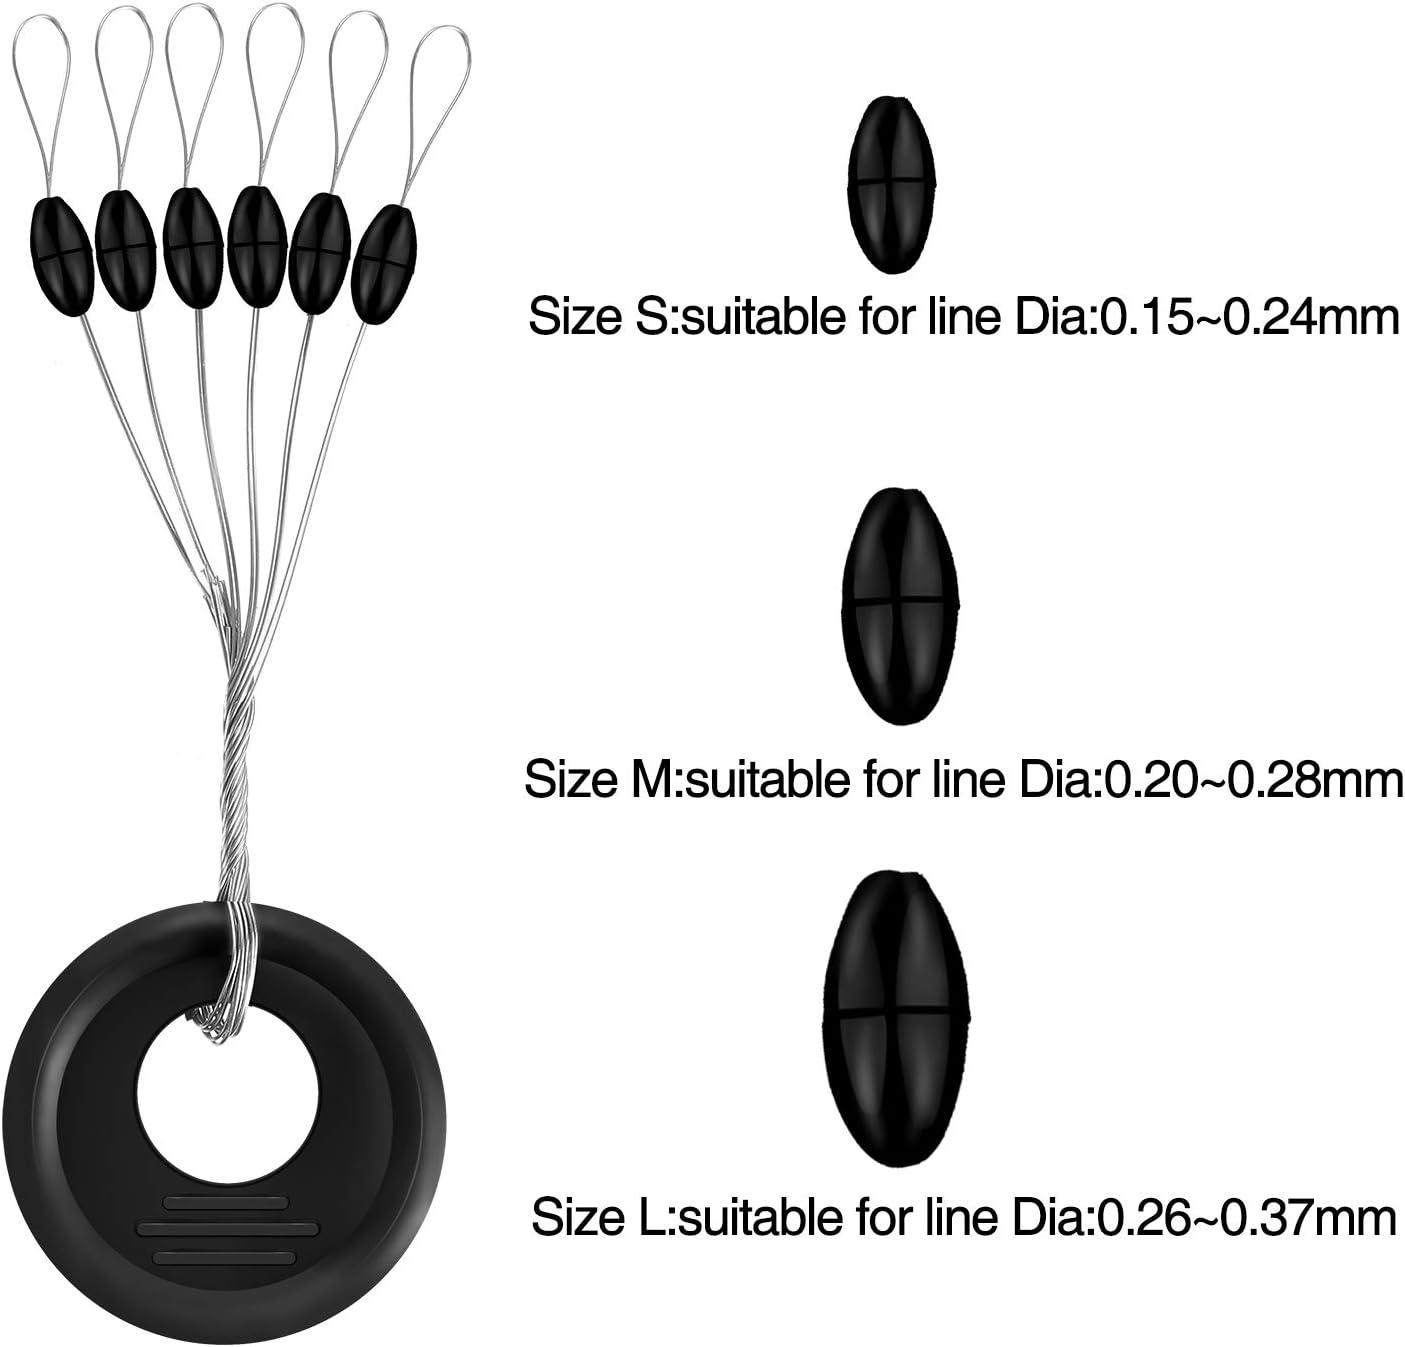 Outus 1200 Pieces Fishing Rubber Bobber Beads Stopper 6 in 1 Black